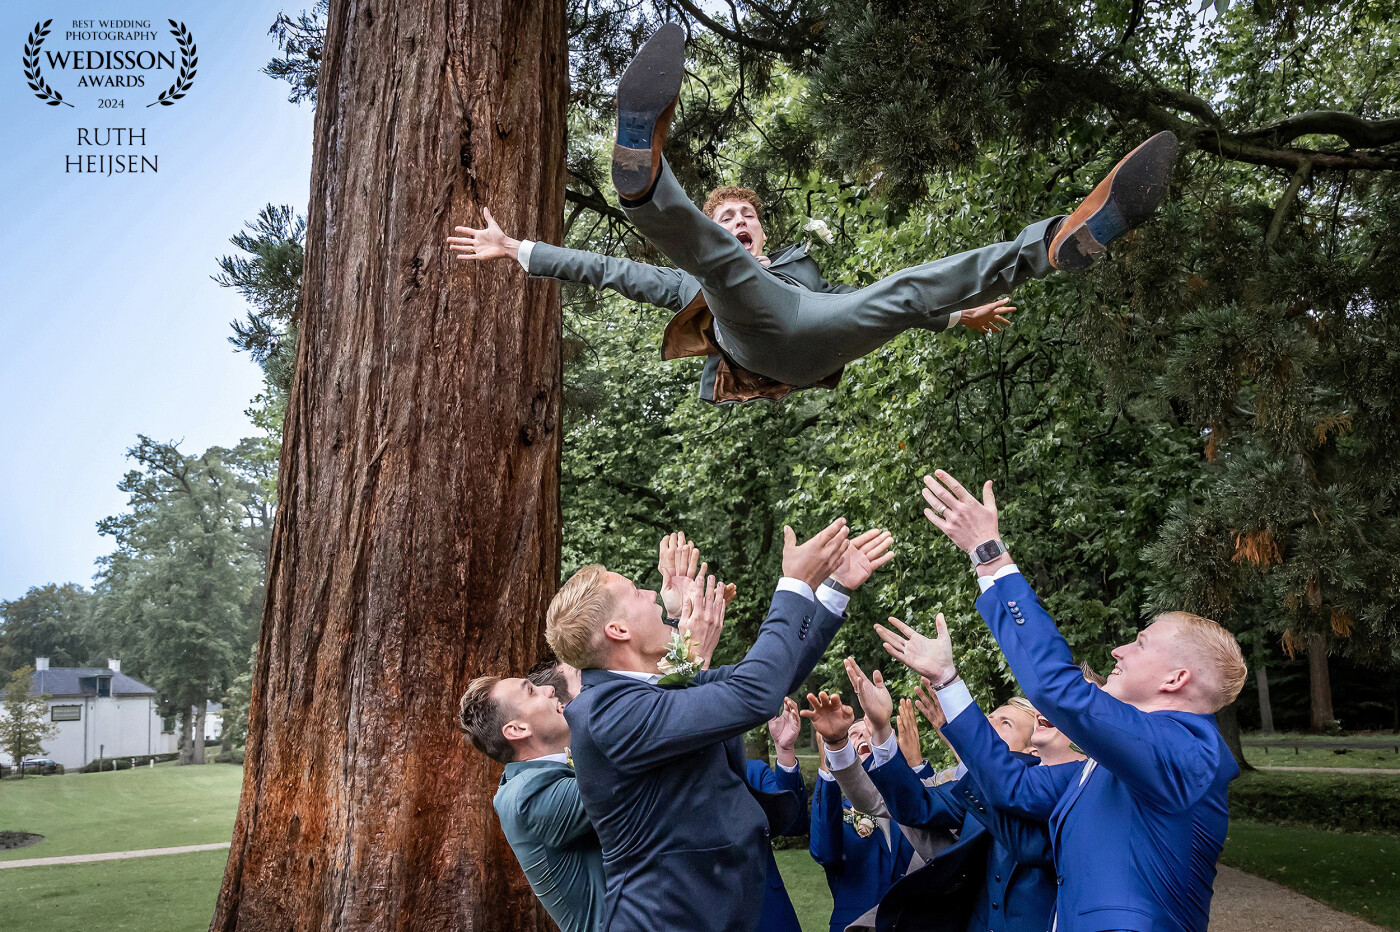 Capturing the thrill of the moment: the groom, propelled skyward by the exuberance of his ten friends, extends his limbs and lifts his head. A blend of pure joy and the anticipation of the aerial adventure etched across his face. <br />
The photo symbolizes the groom's leap into the exciting path of marriage.